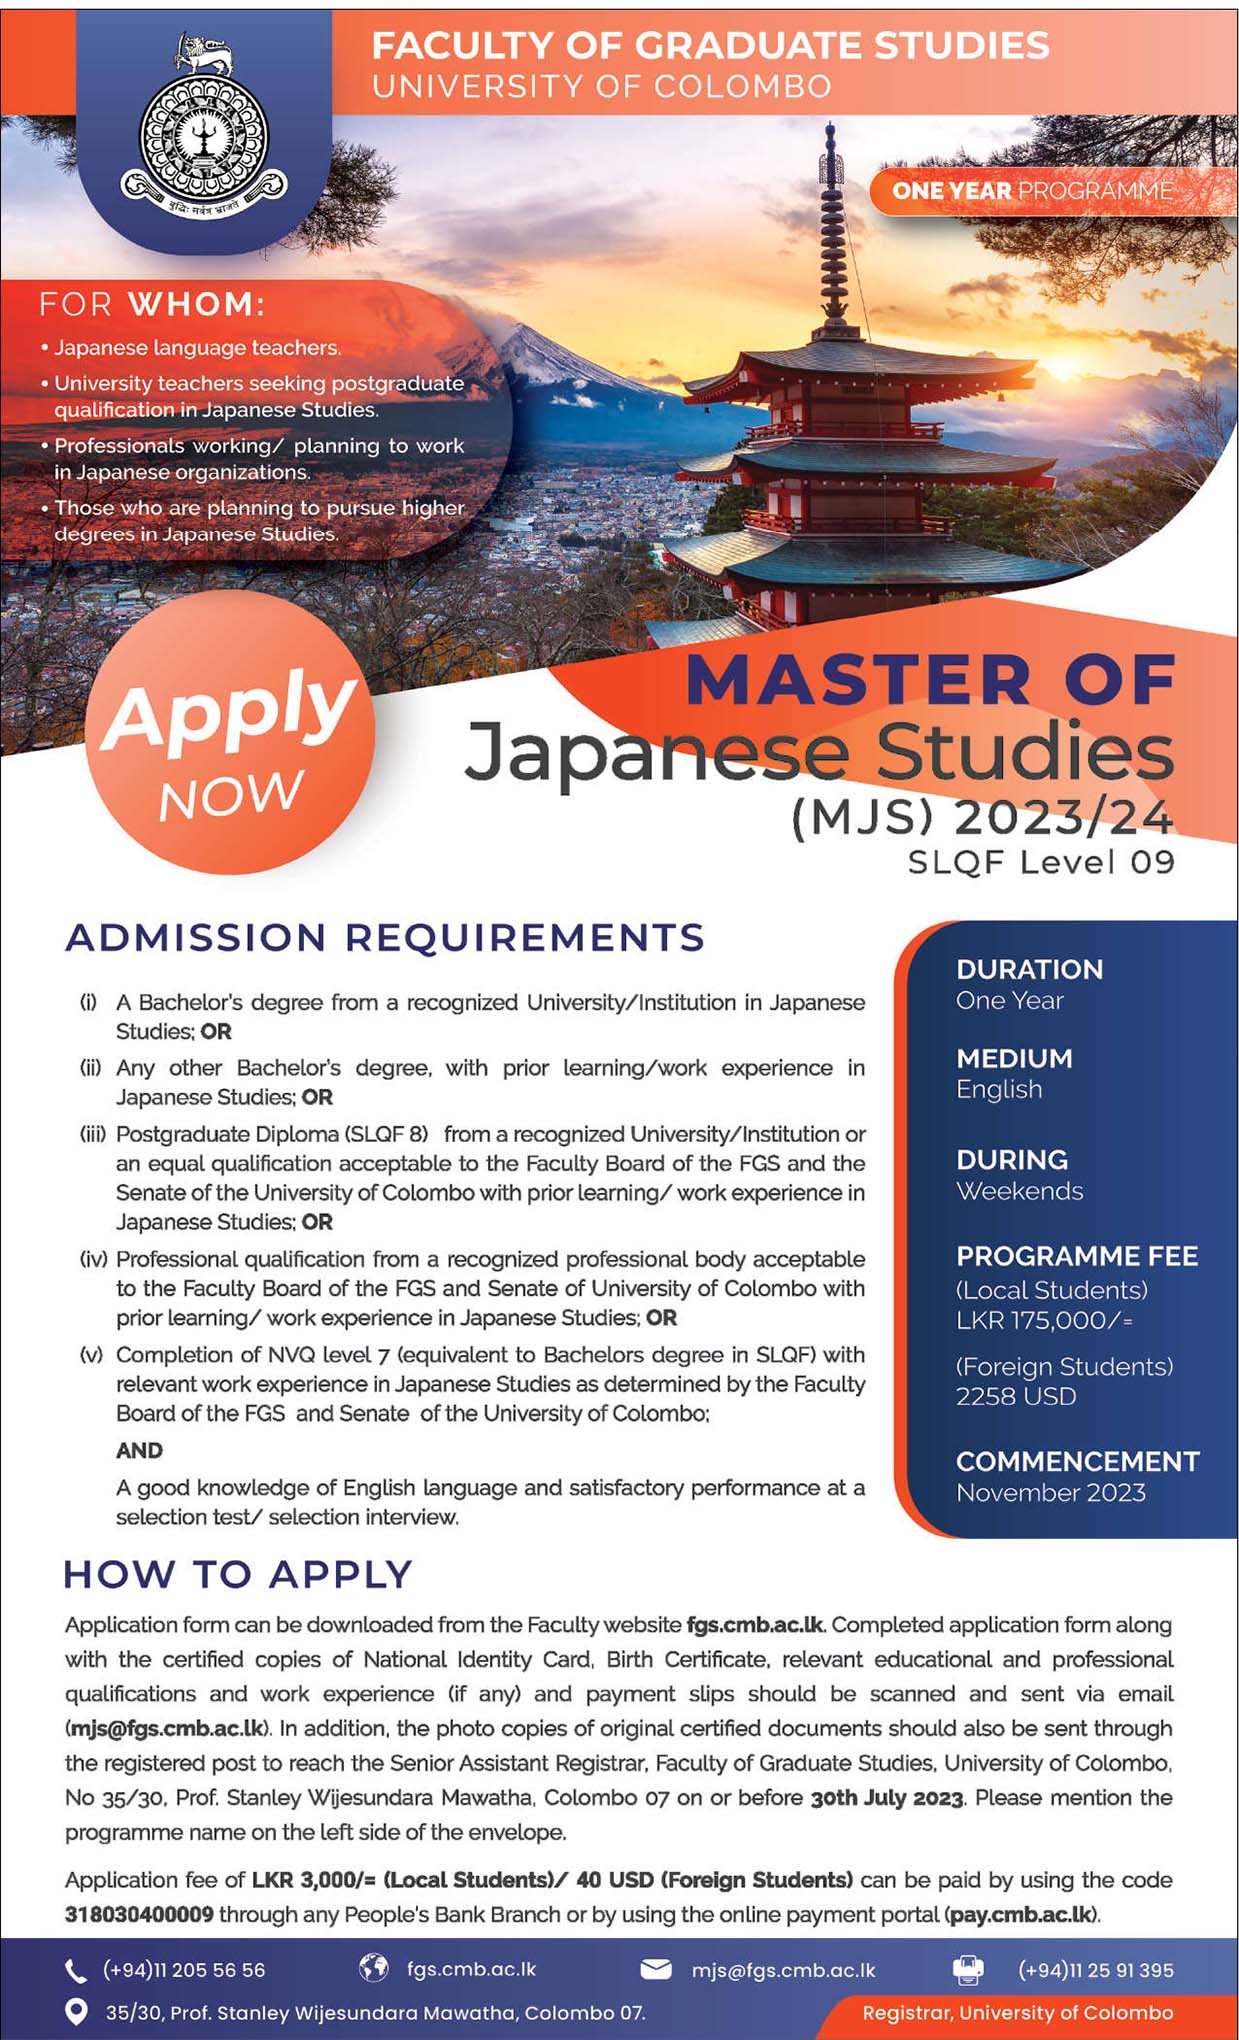 Masters in Japanese Studies 2023 - University of Colombo